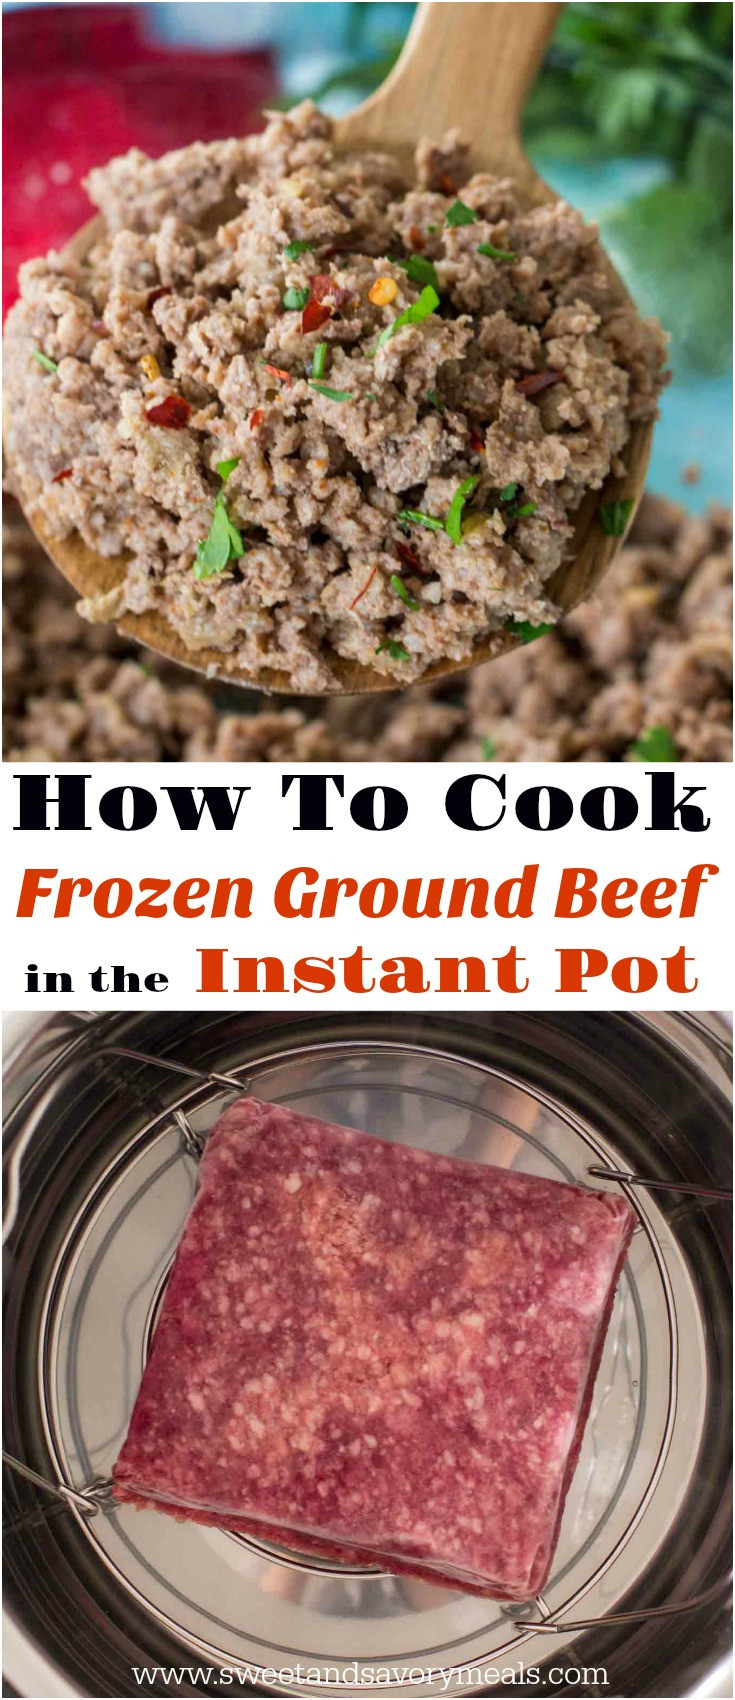 How To Make Ground Beef
 How To Cook Frozen Ground Beef In The Instant Pot Sweet